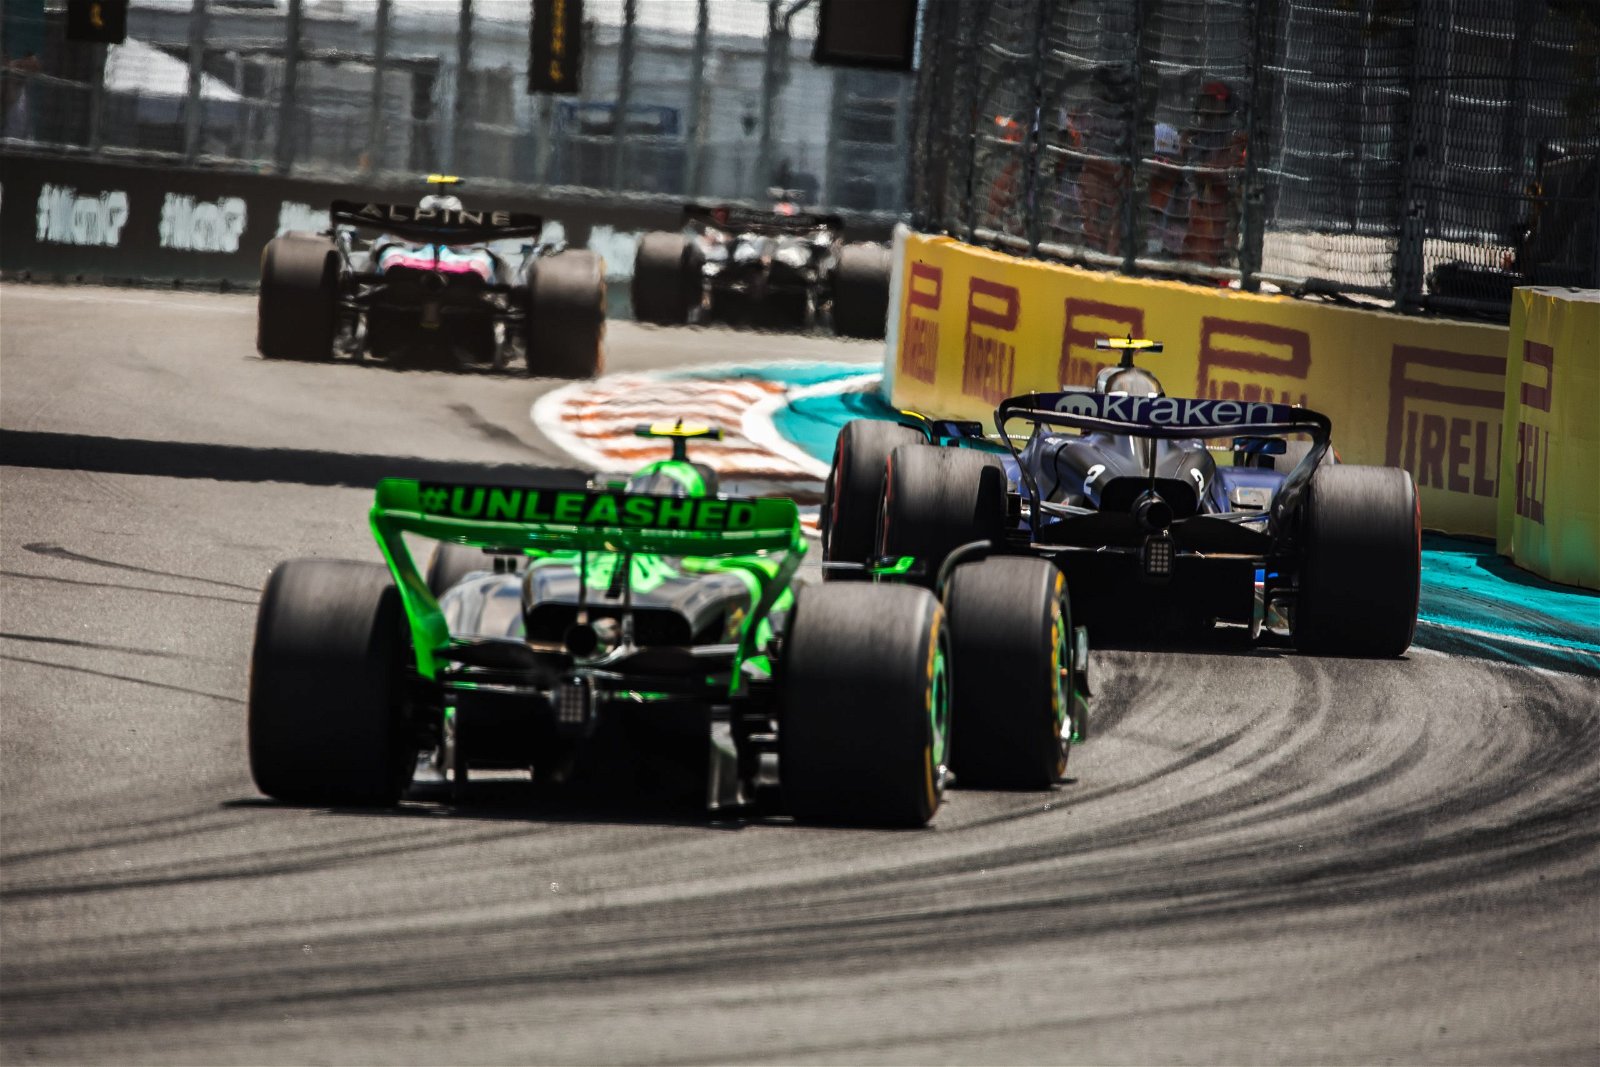 Full results from the Formula 1 Miami Grand Prix at Miami International Autodrome. Image: Bearne / XPB Images